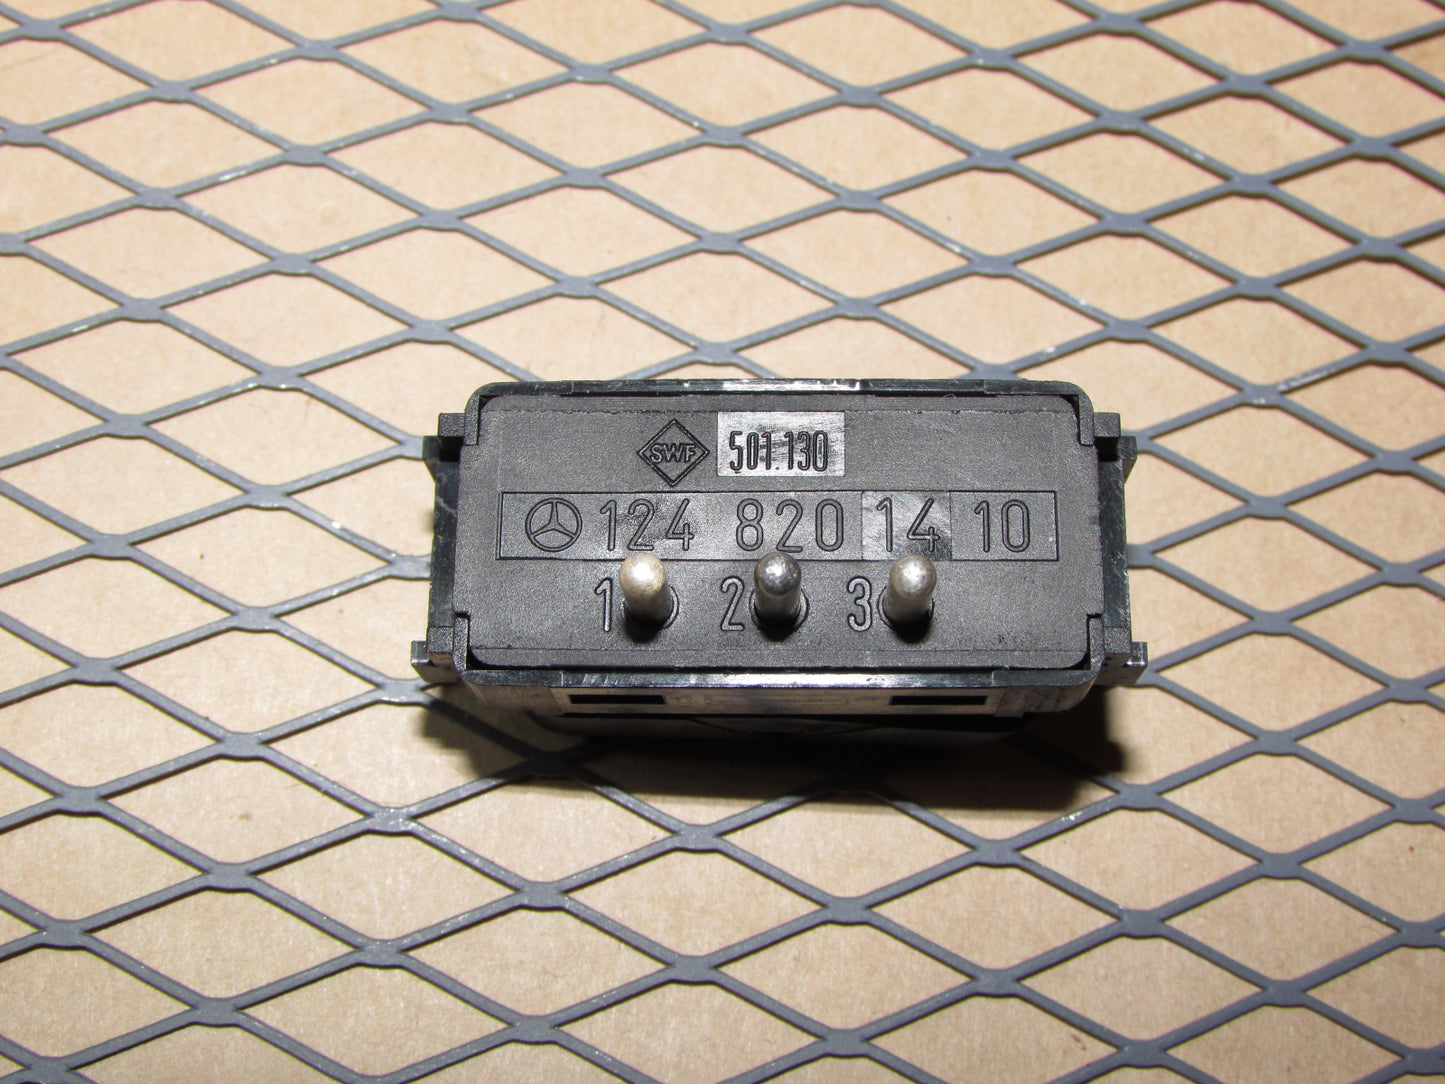 86 87 88 89 90 91 92 93 Mercedes Benz 300E OEM Dome Map Light Switch